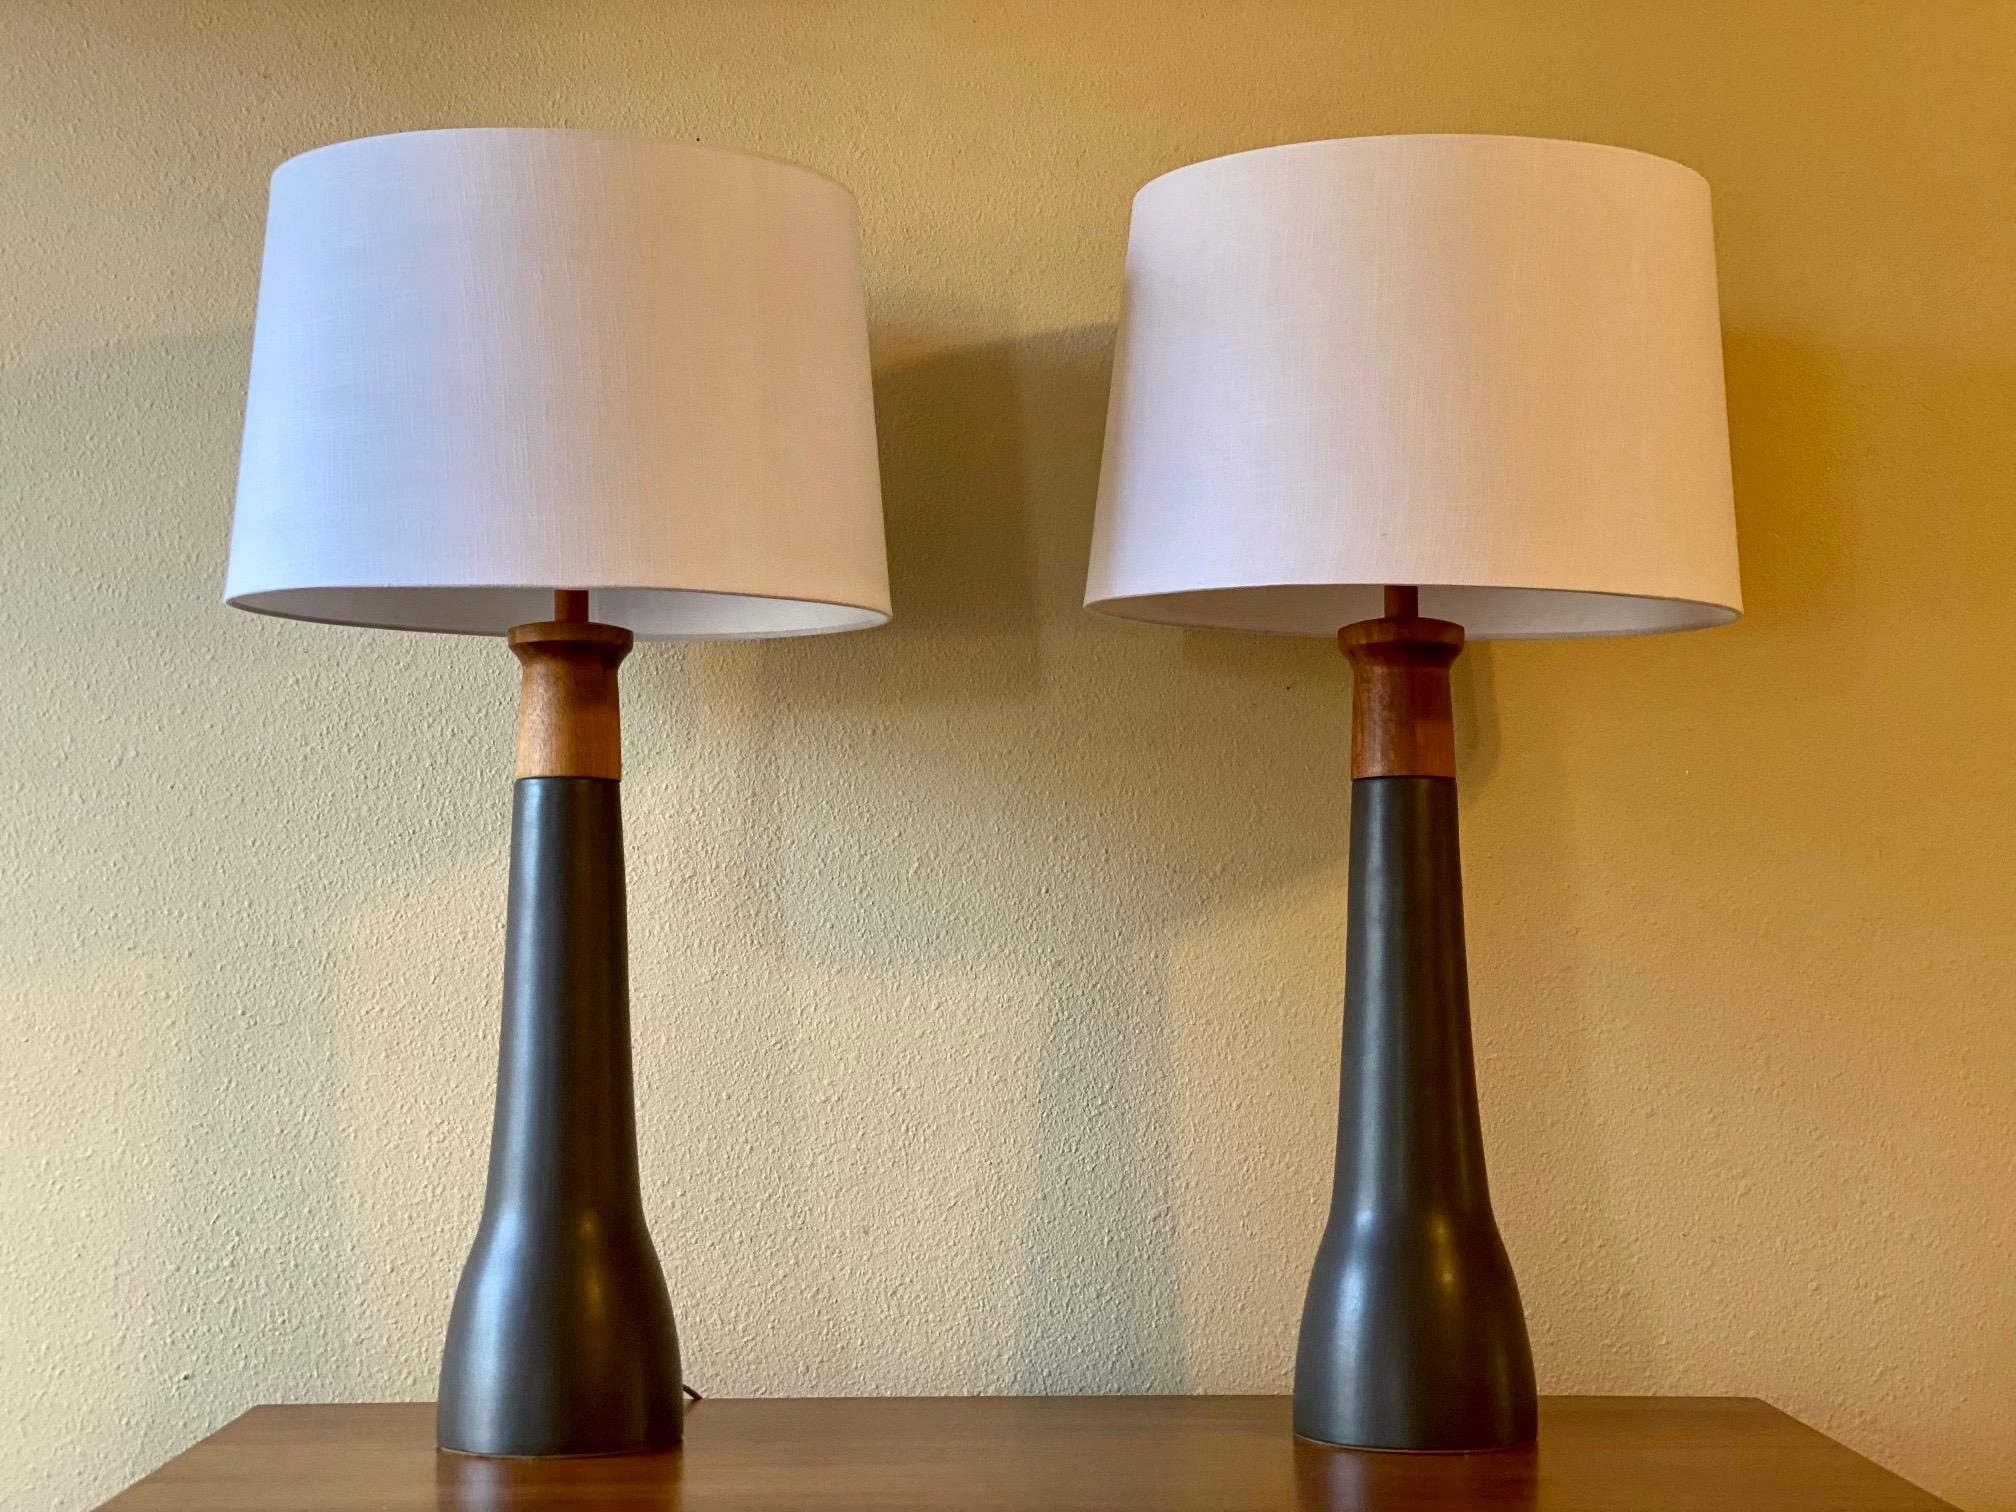 Elegant pair of walnut and ceramic table lamps designed by husband and wife duo Jane & Gordon Martz. Produced by Marshall Studios, Indiana. Lamps feature a lovely matte black/gunmetal glaze with figured walnut necks and finials. New harps and